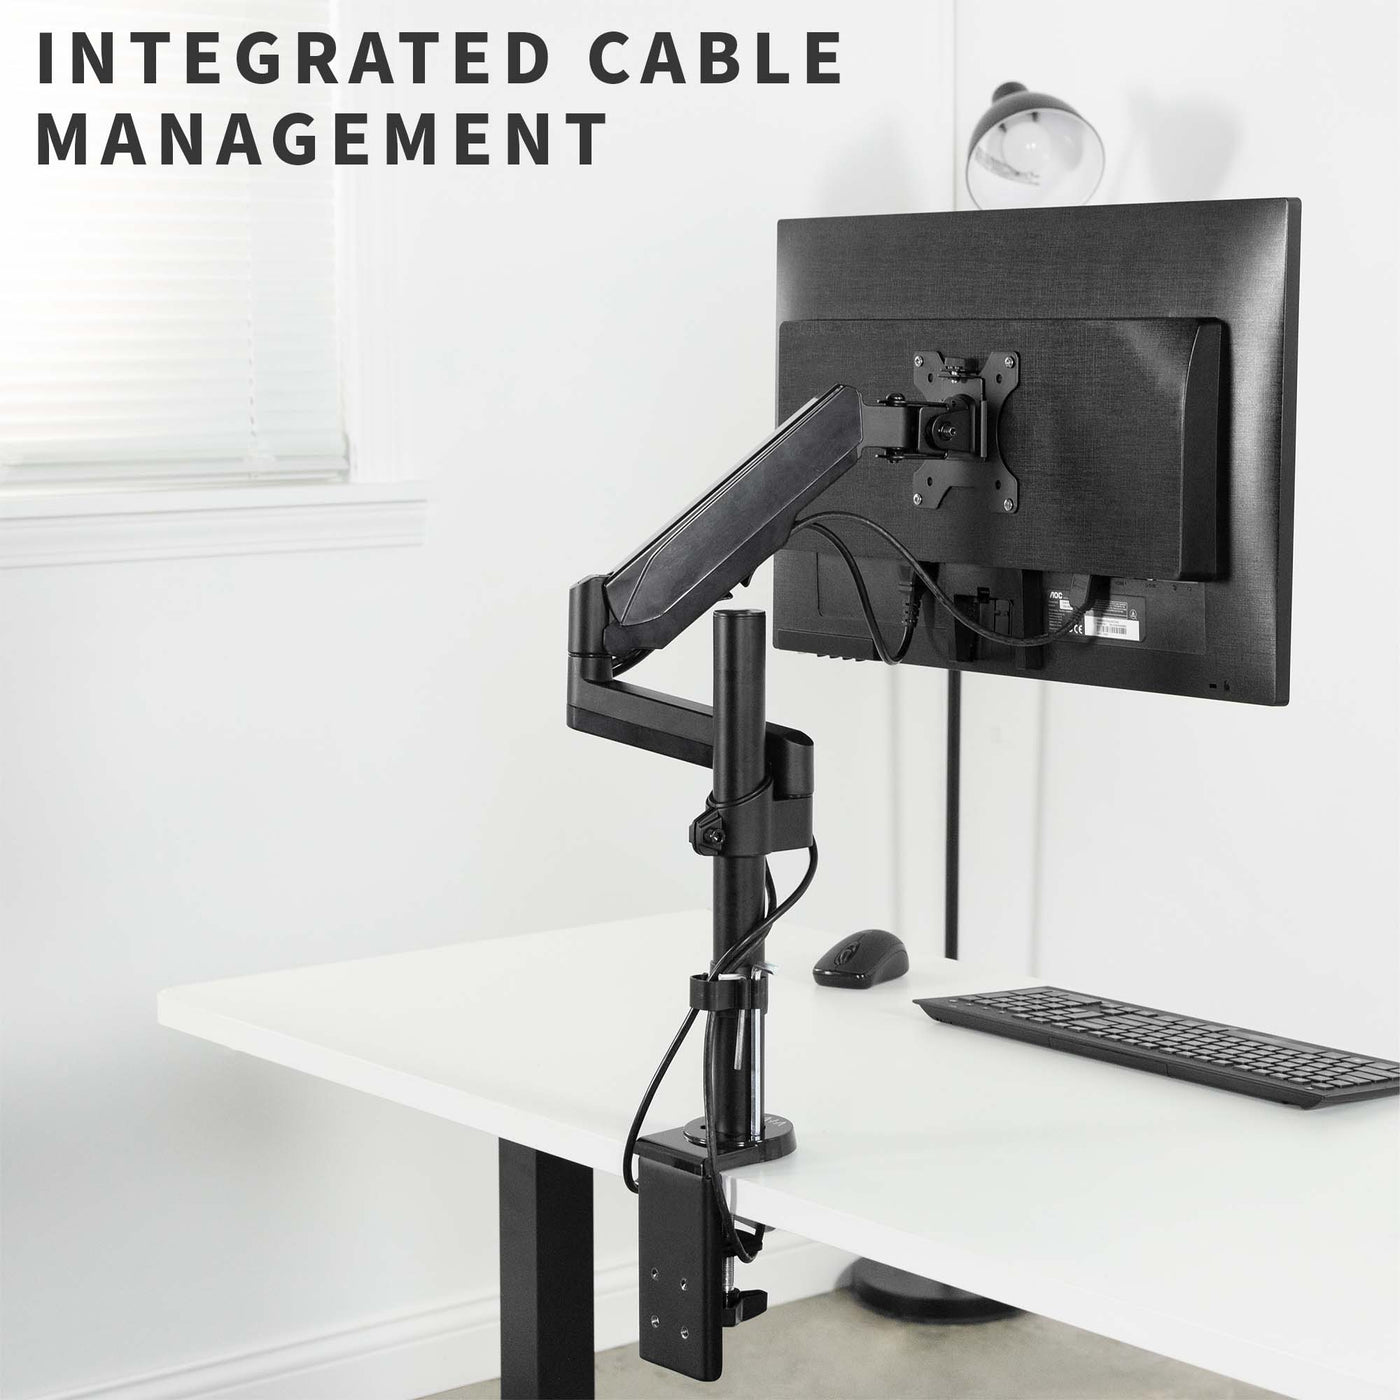 Pneumatic arm with integrated cable management to maintain a visually appealing workspace.